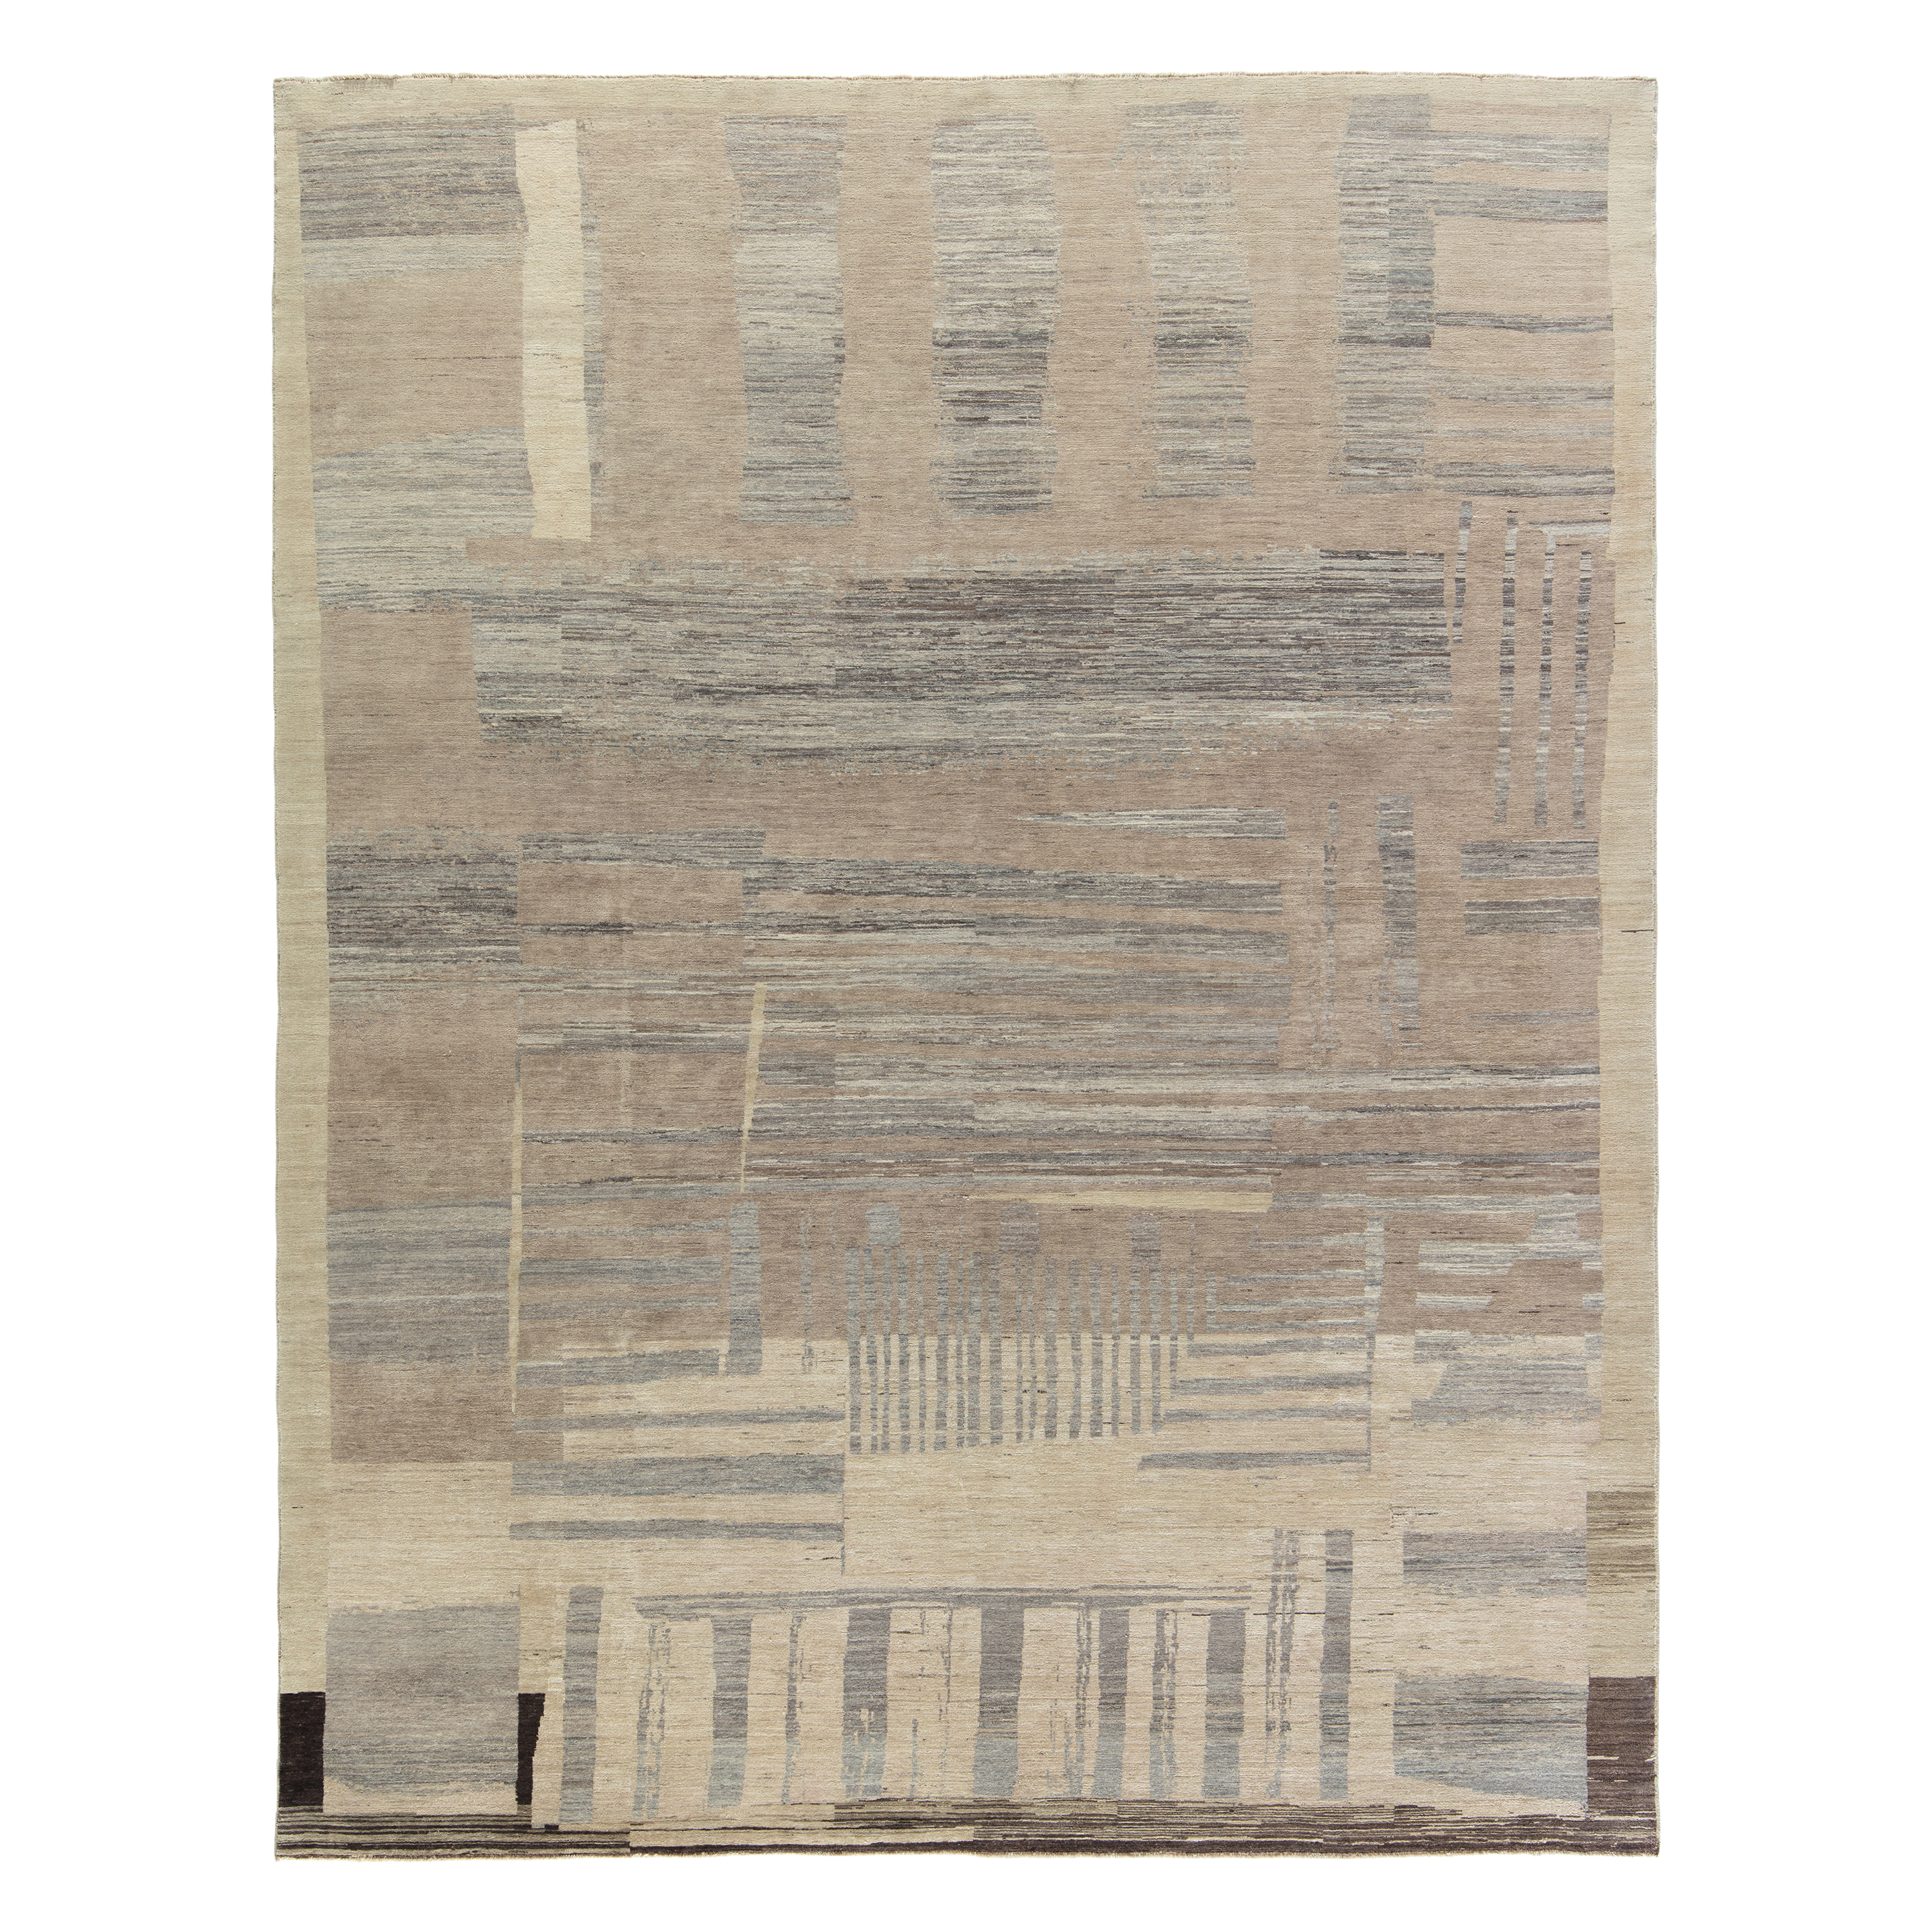 Our Sahara rug is hand-knotted, and made from the finest hand-carded, hand-spun naturally dyed wool.